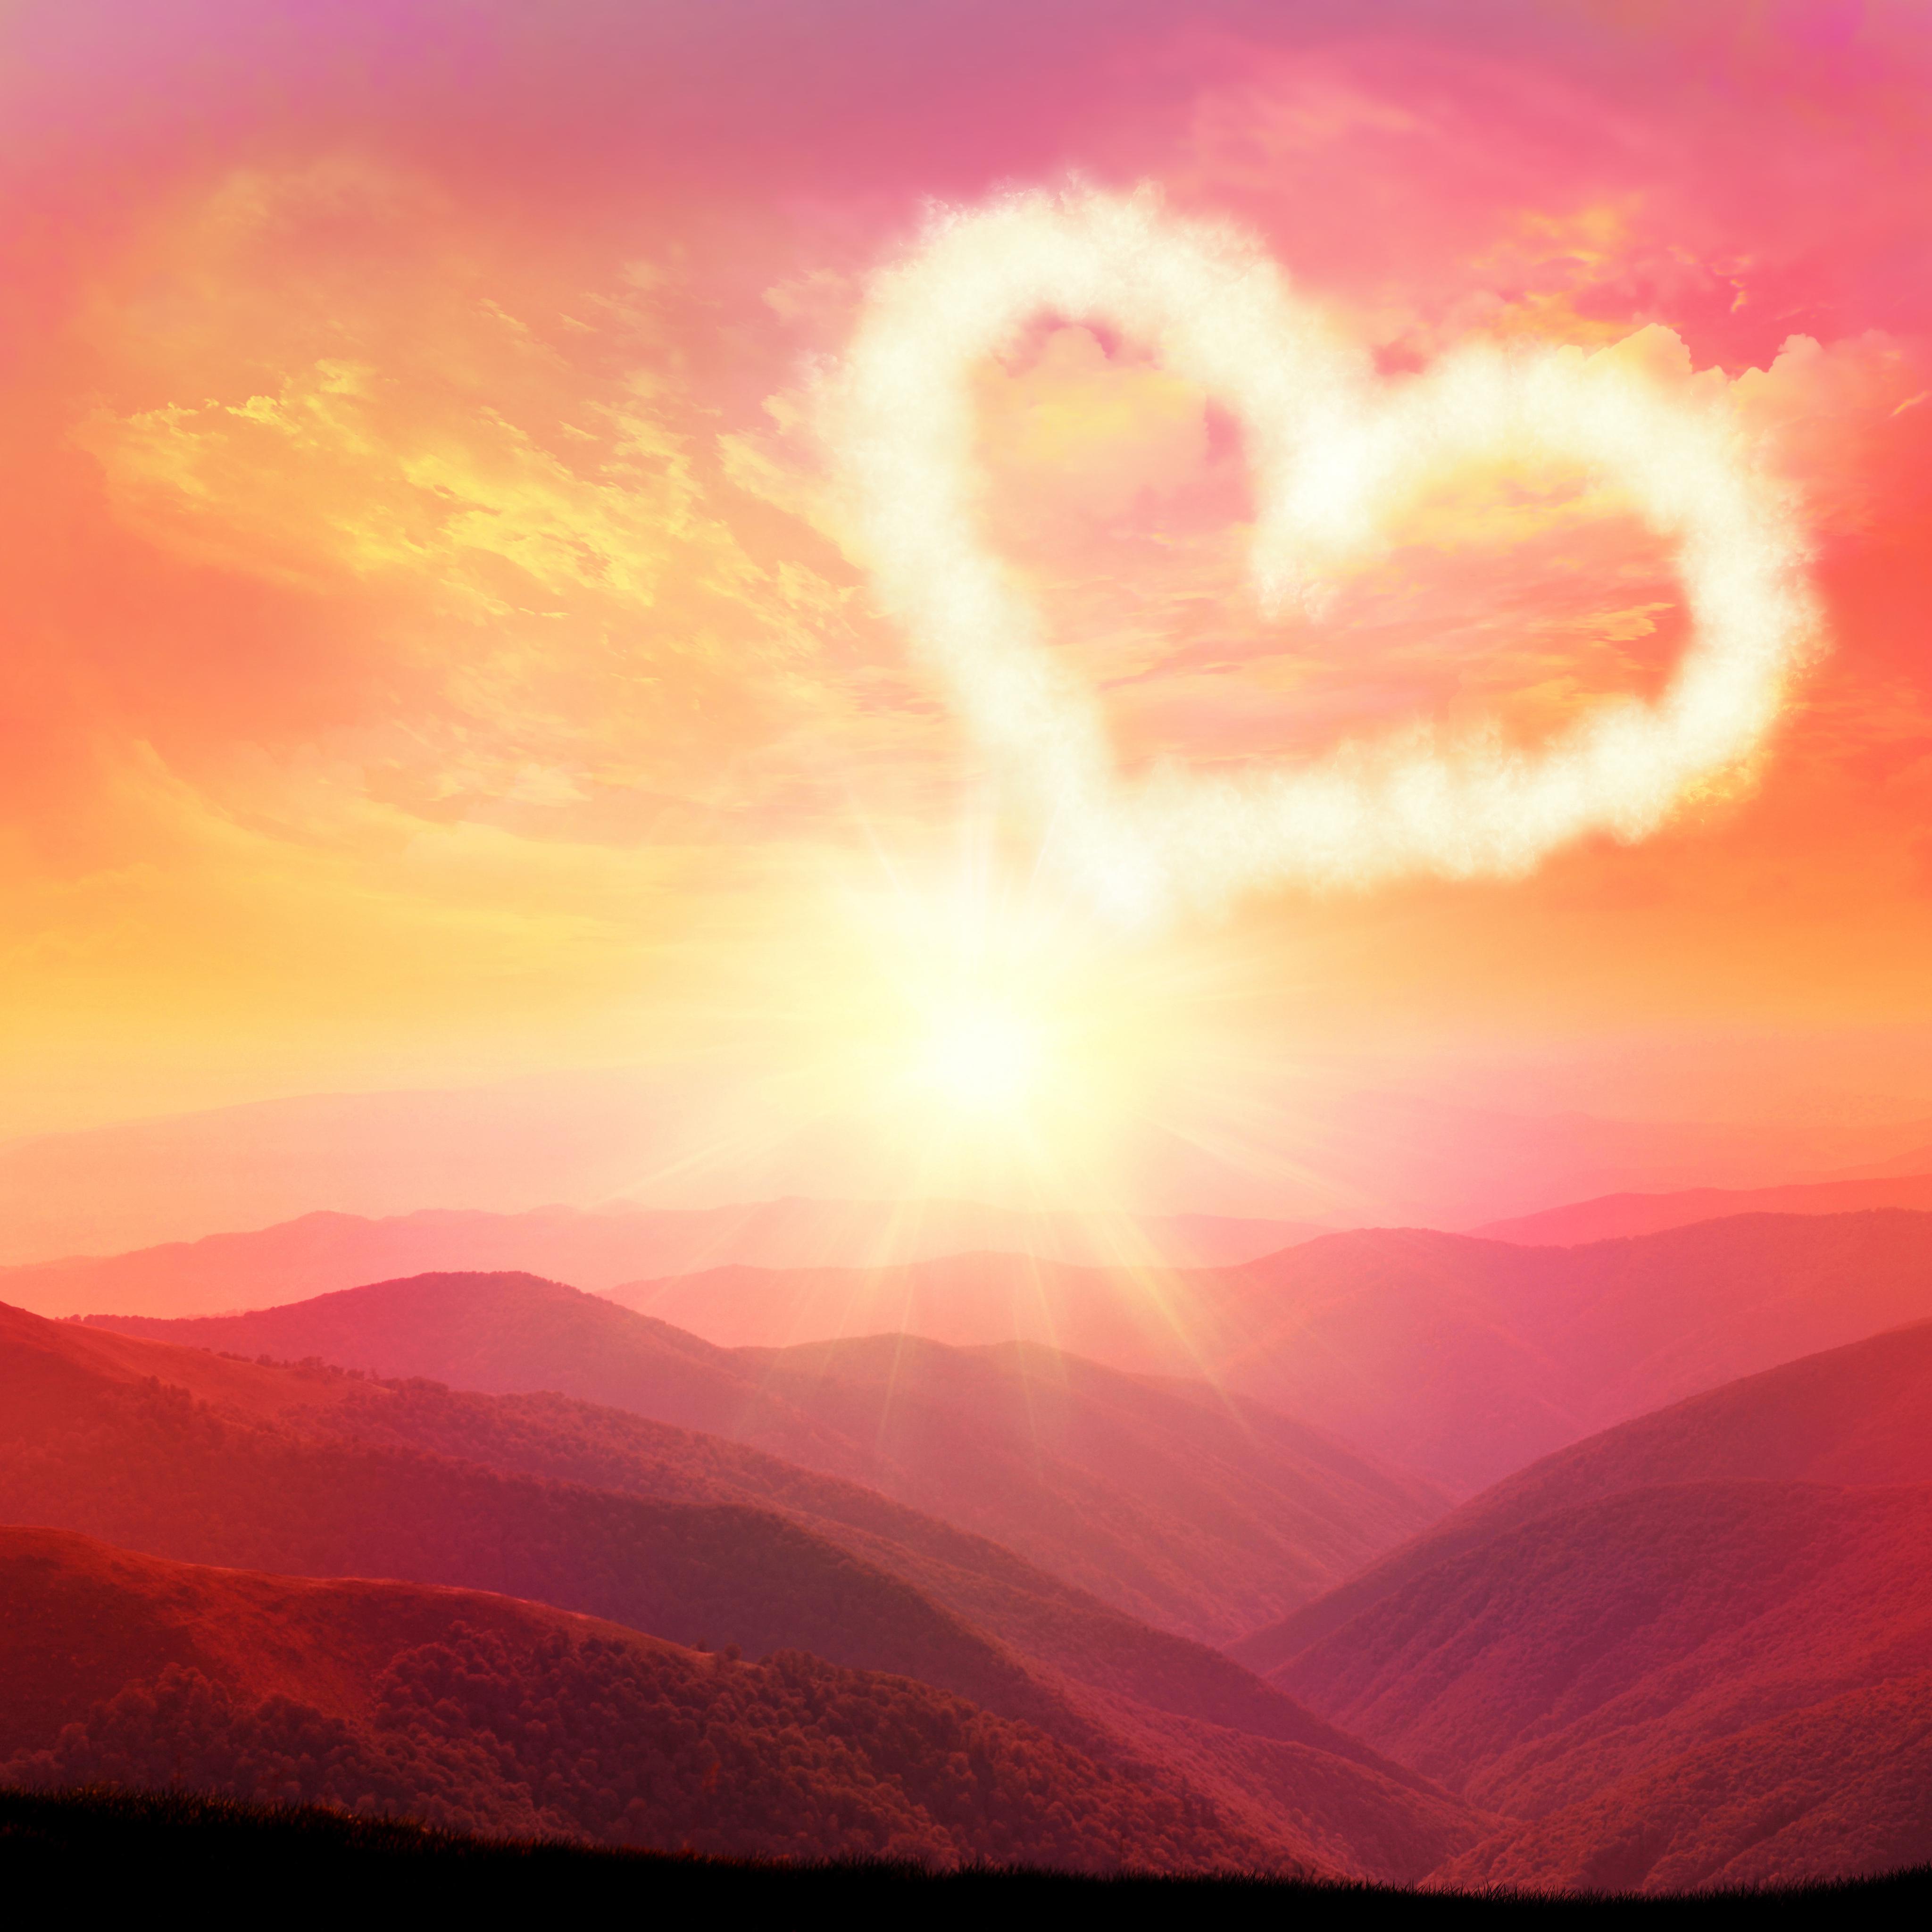 Love in the Air - 20 Romantic Melodies for a Deeply Intimate Mood